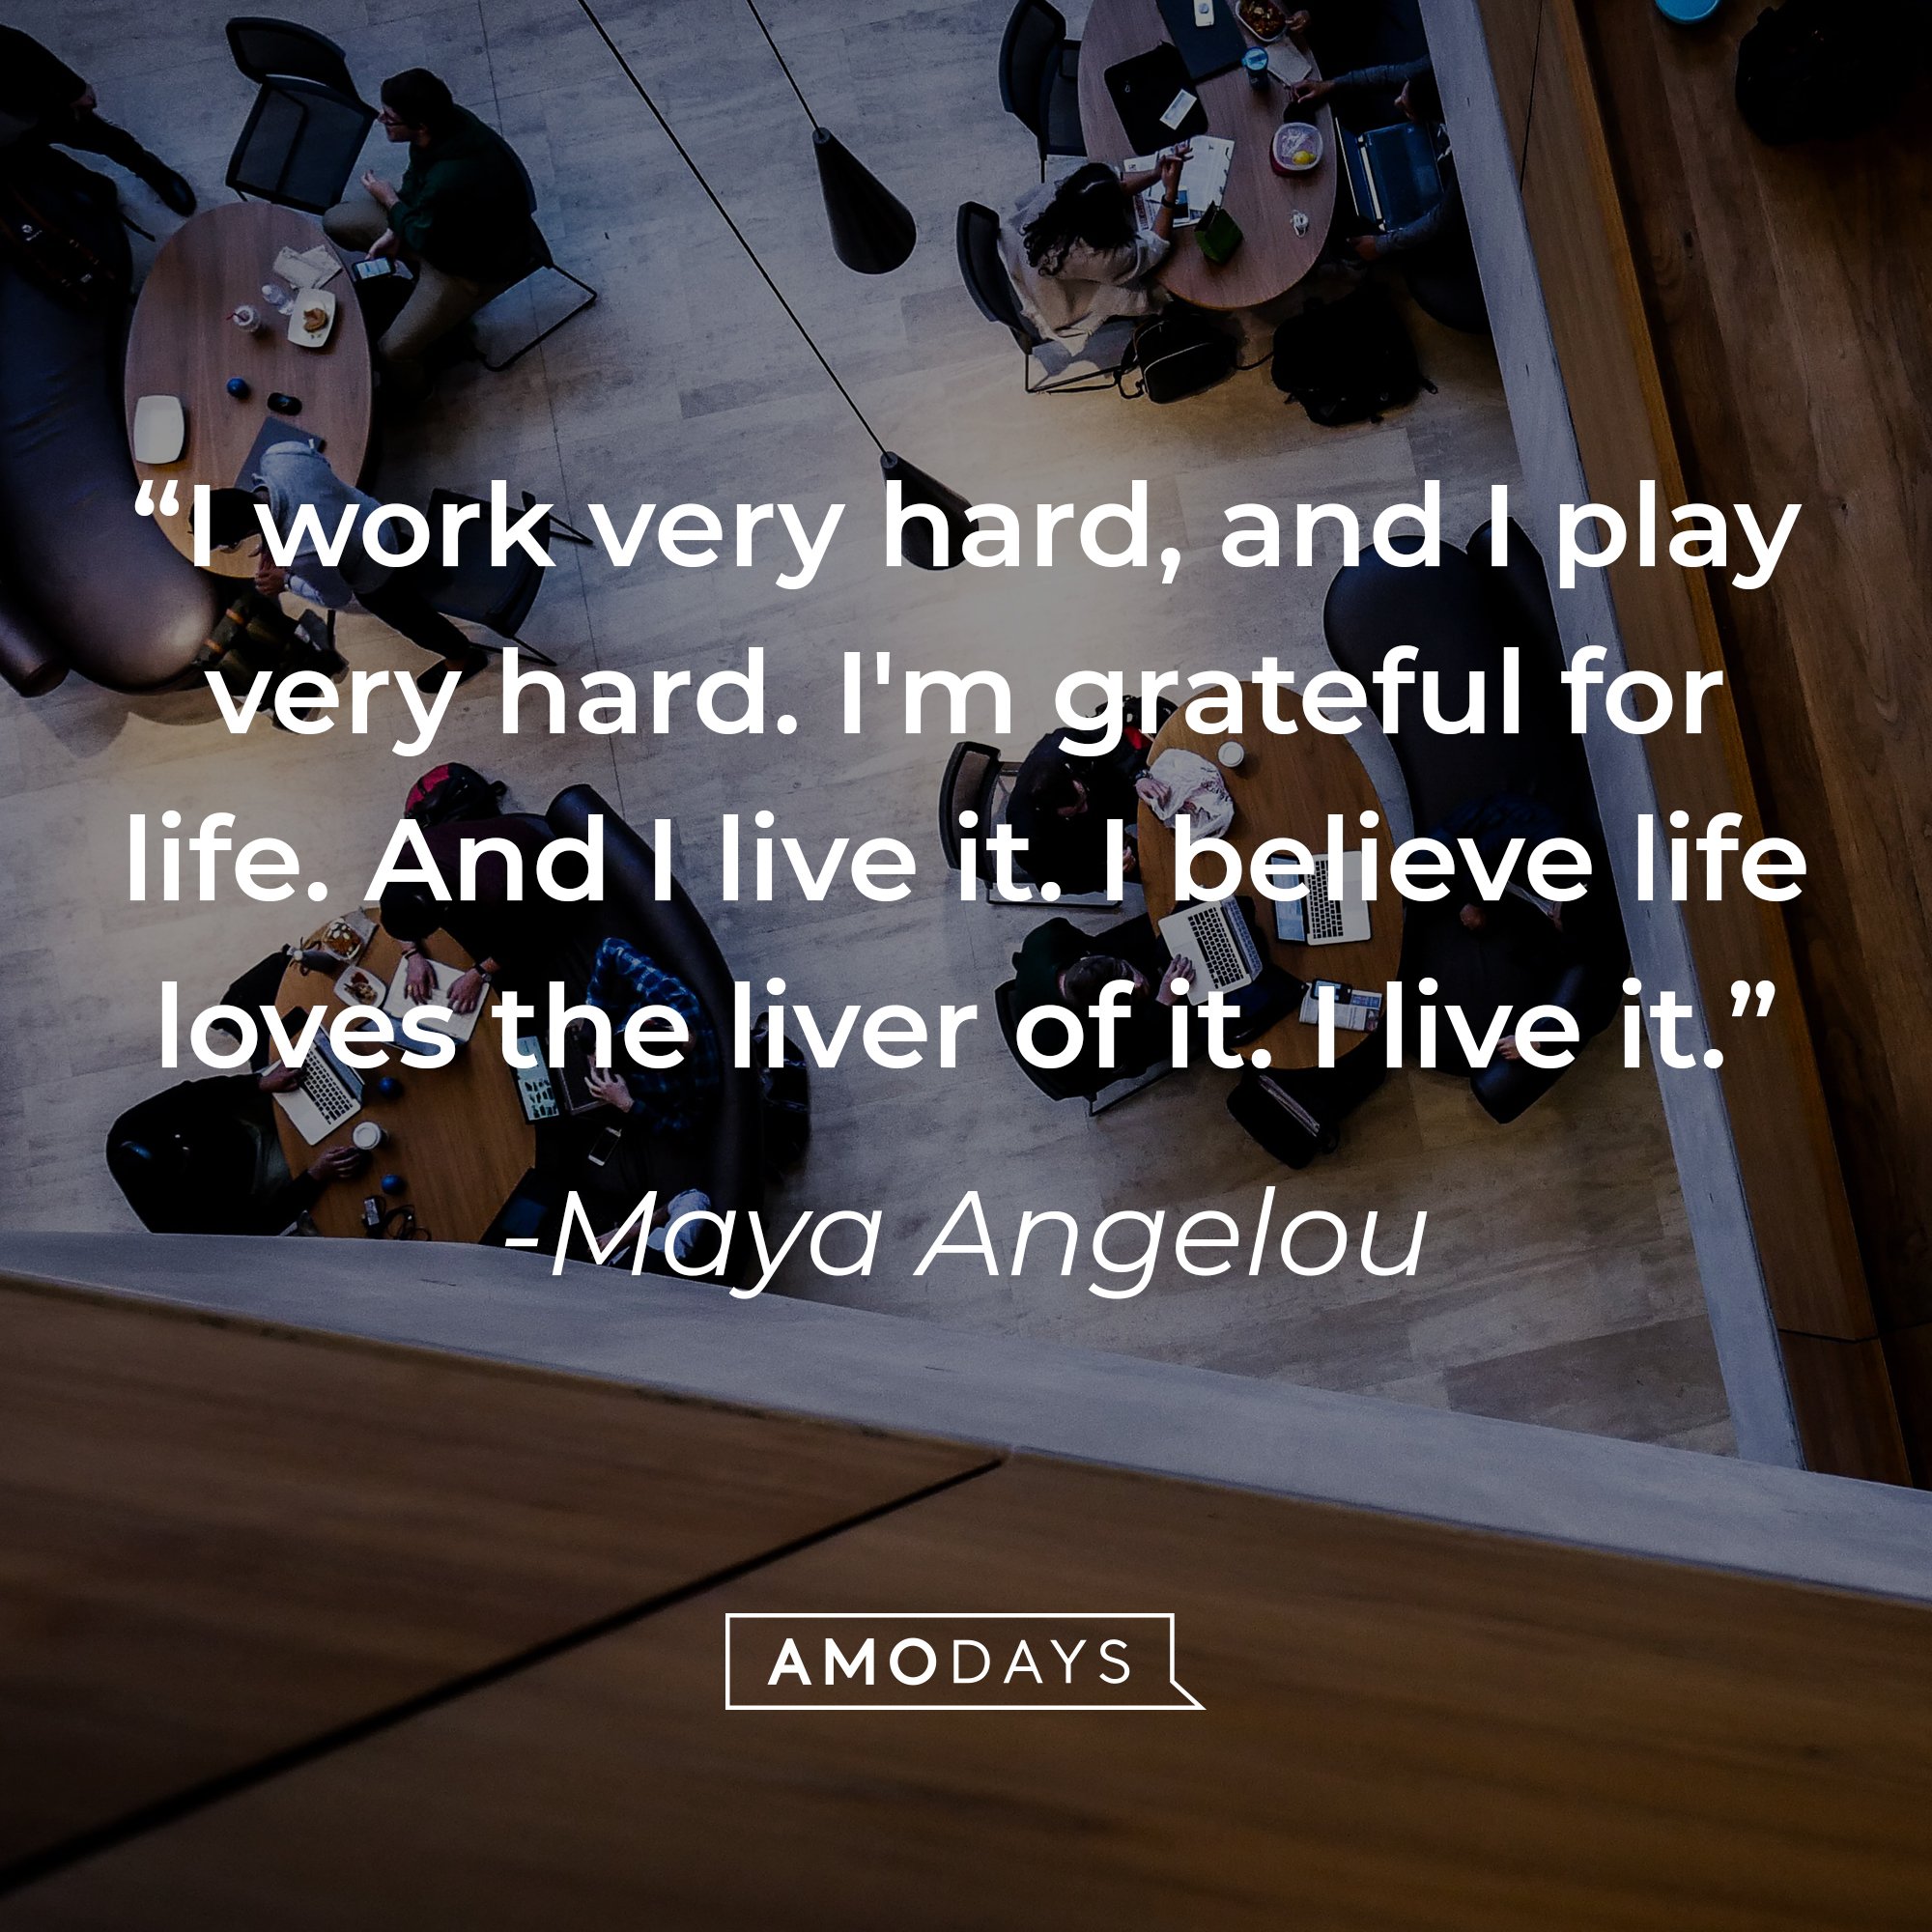 Maya Angelou's quote: "I work very hard, and I play very hard. I'm grateful for life. And I live it. I believe life loves the liver of it. I live it." | Image: AmoDays